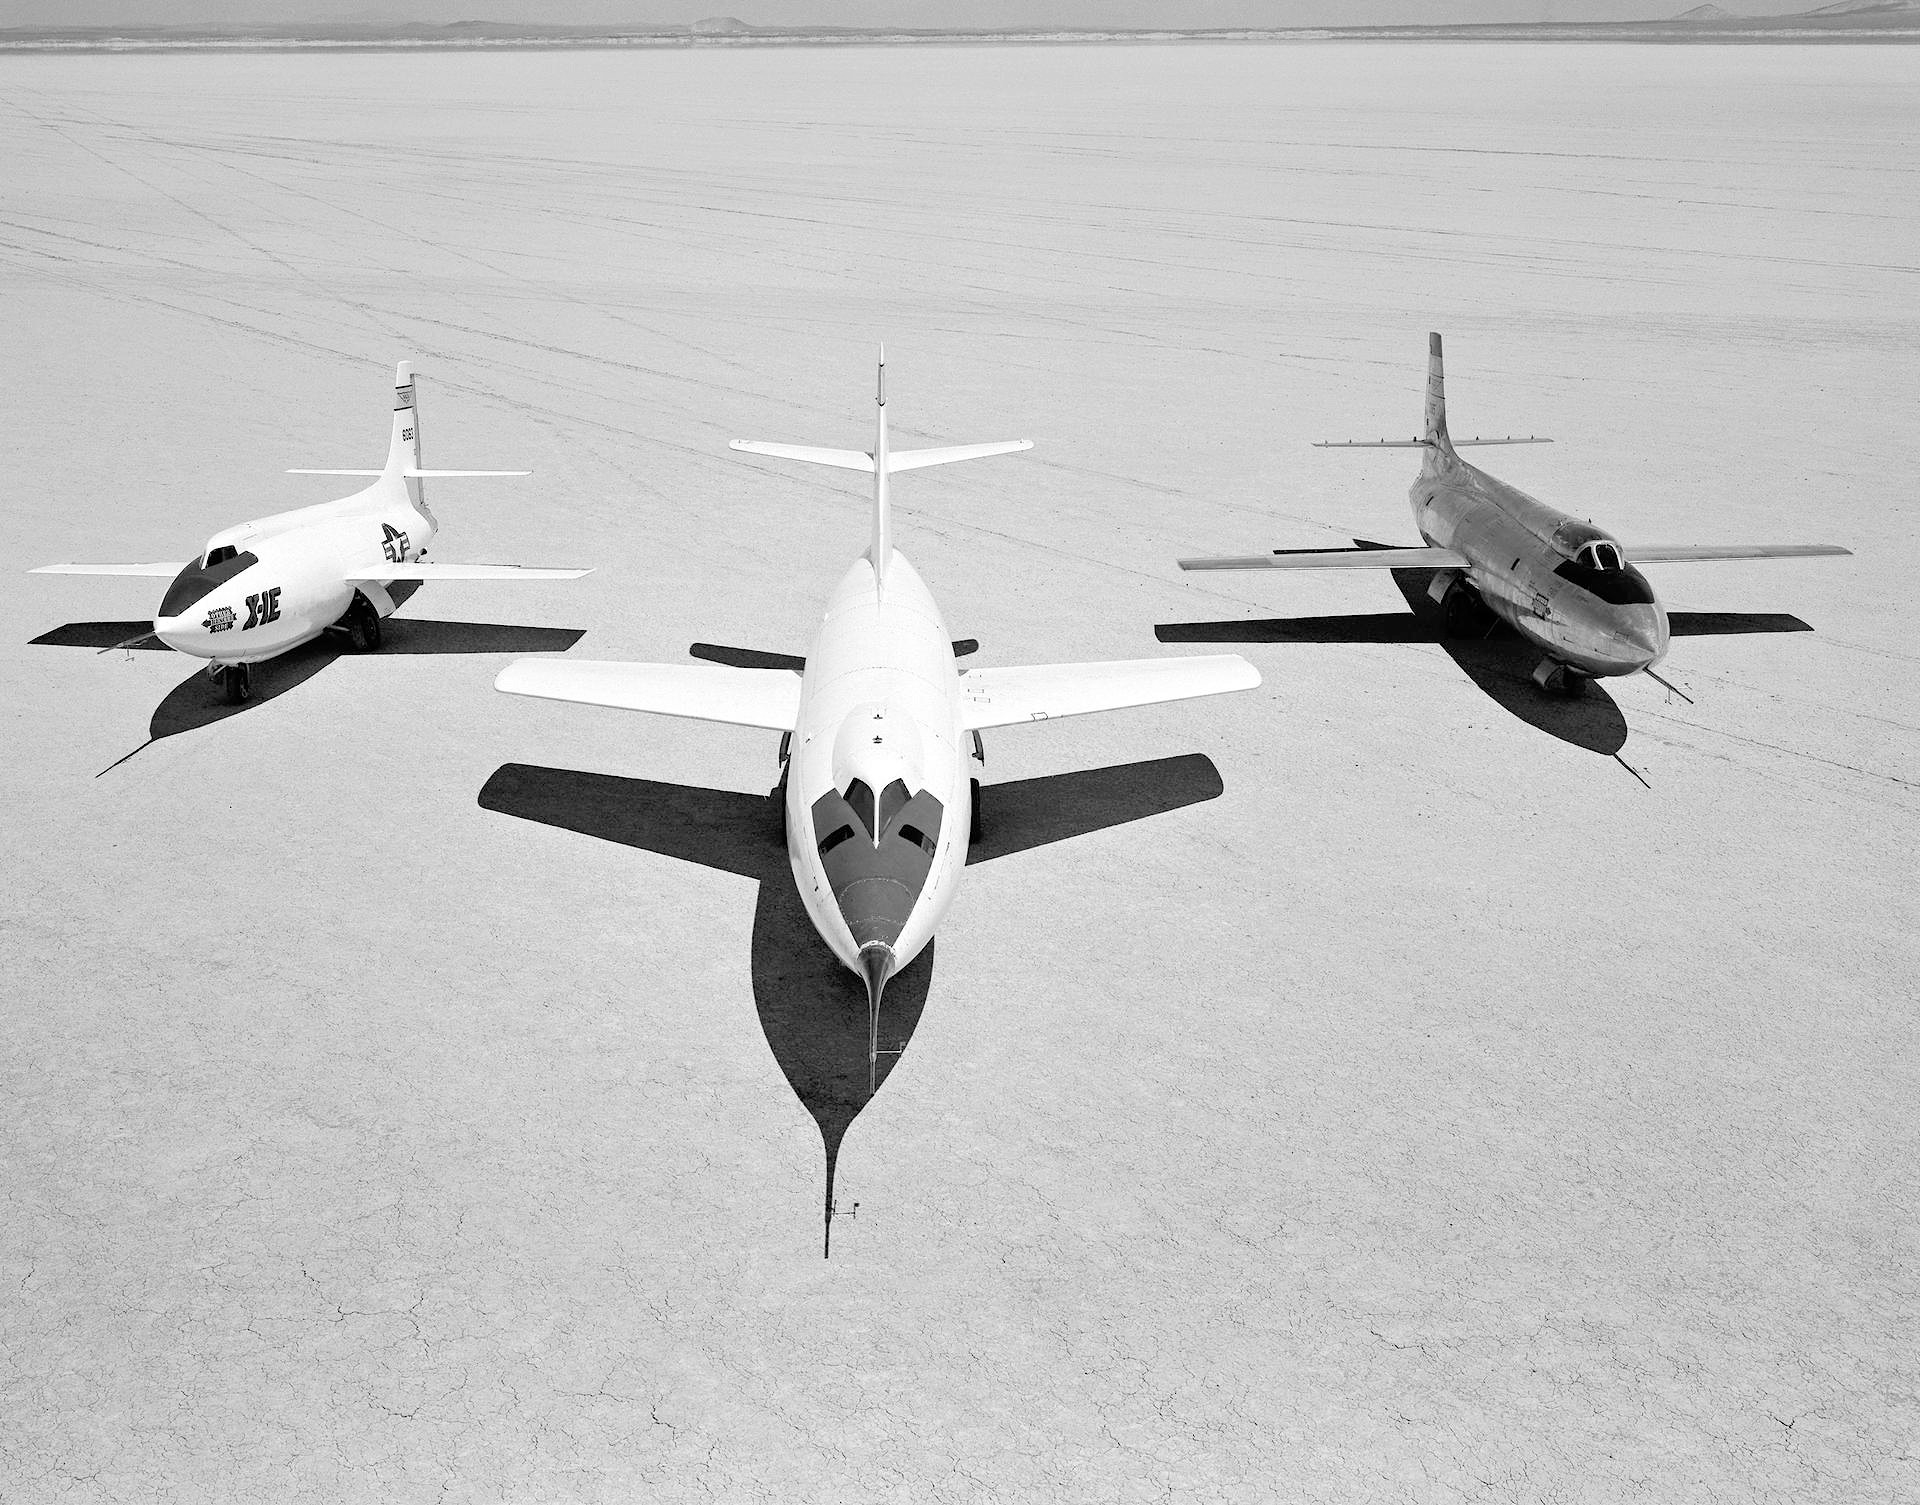 Early NACA research aircraft on the lakebed at the High Speed Research Station in 1955: Left to right: X-1E, D-558-II, X-1B